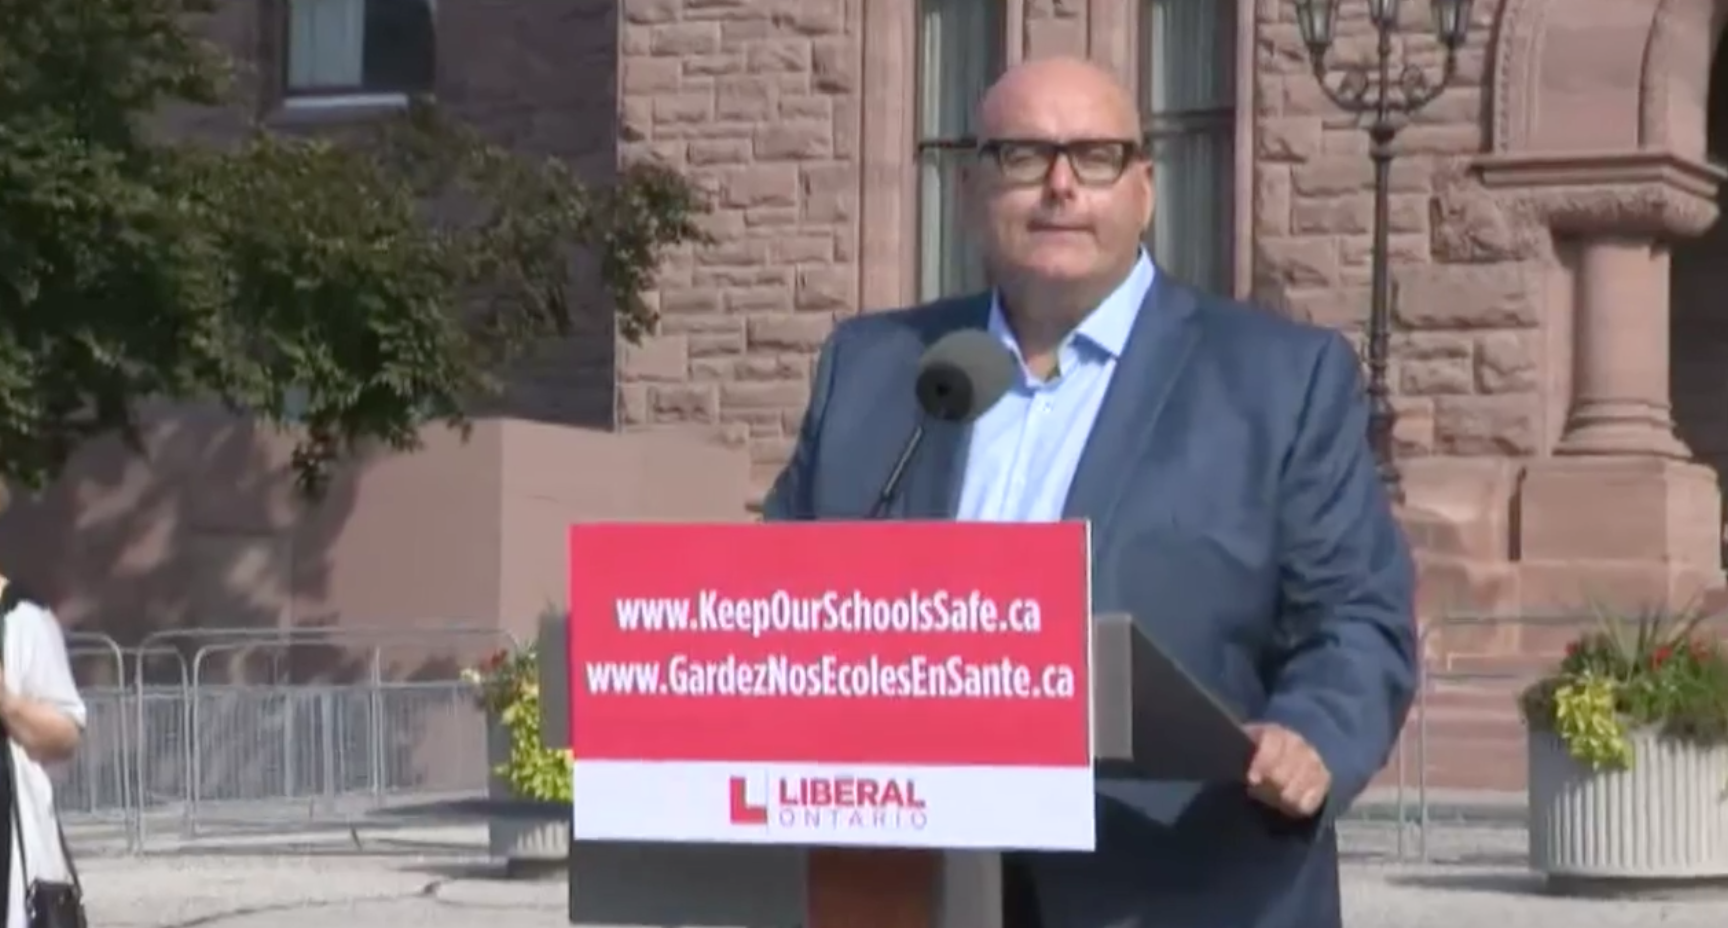 Ontario Liberal, PC parties clash over website collecting feedback on reopening of schools